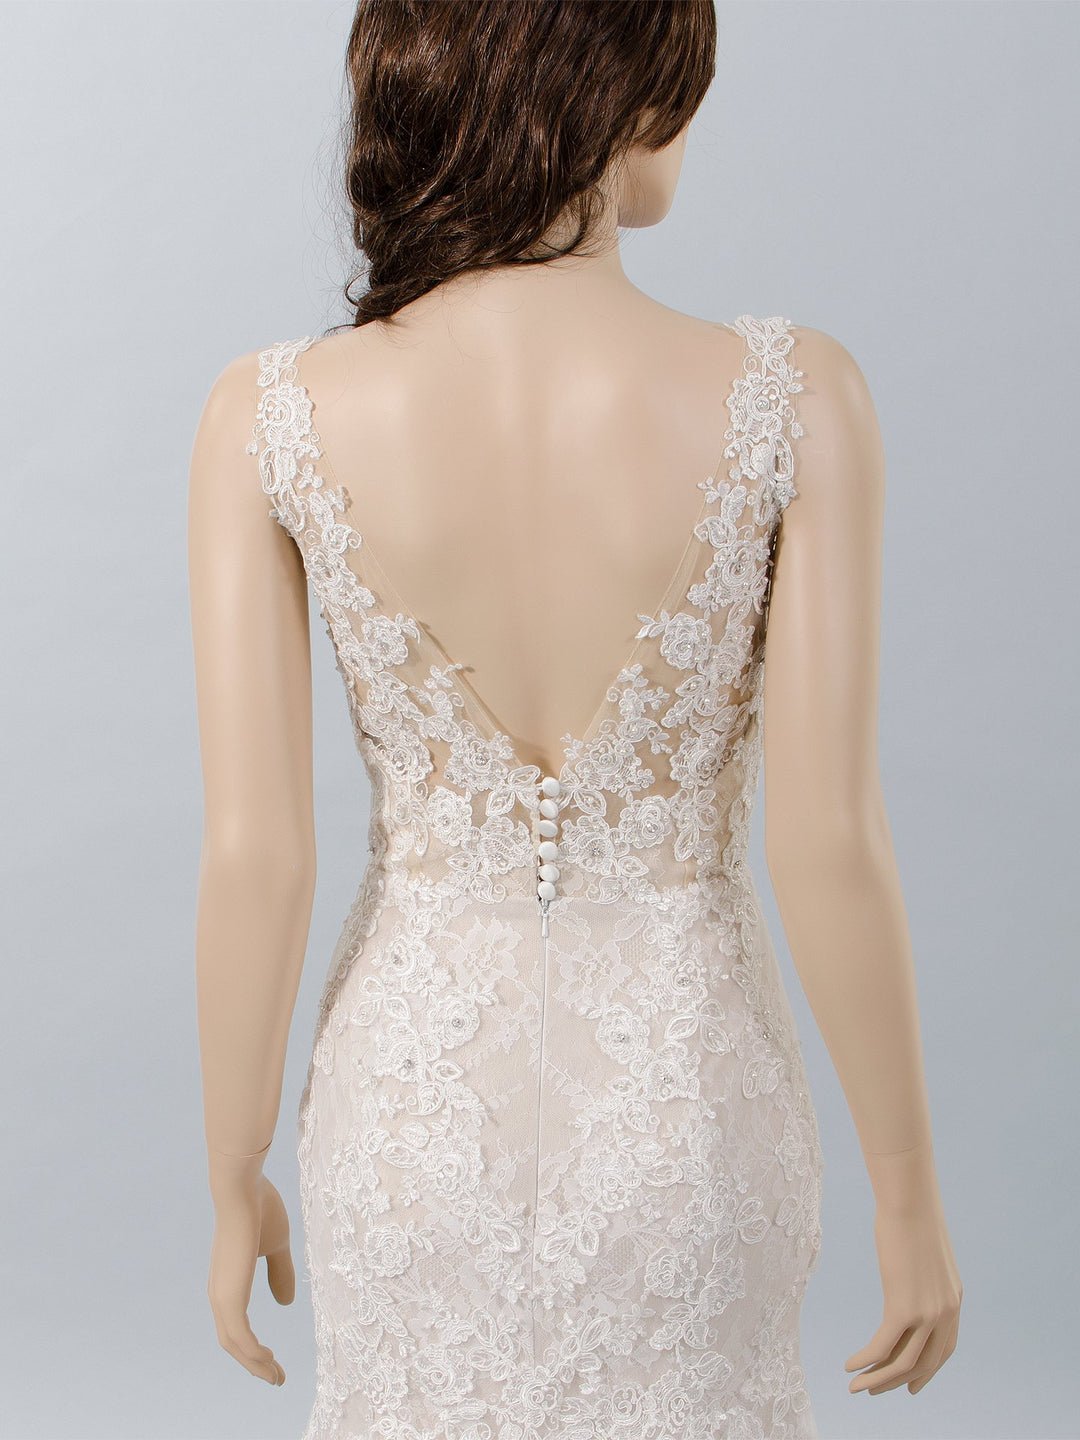 Fit and flare lace wedding dress